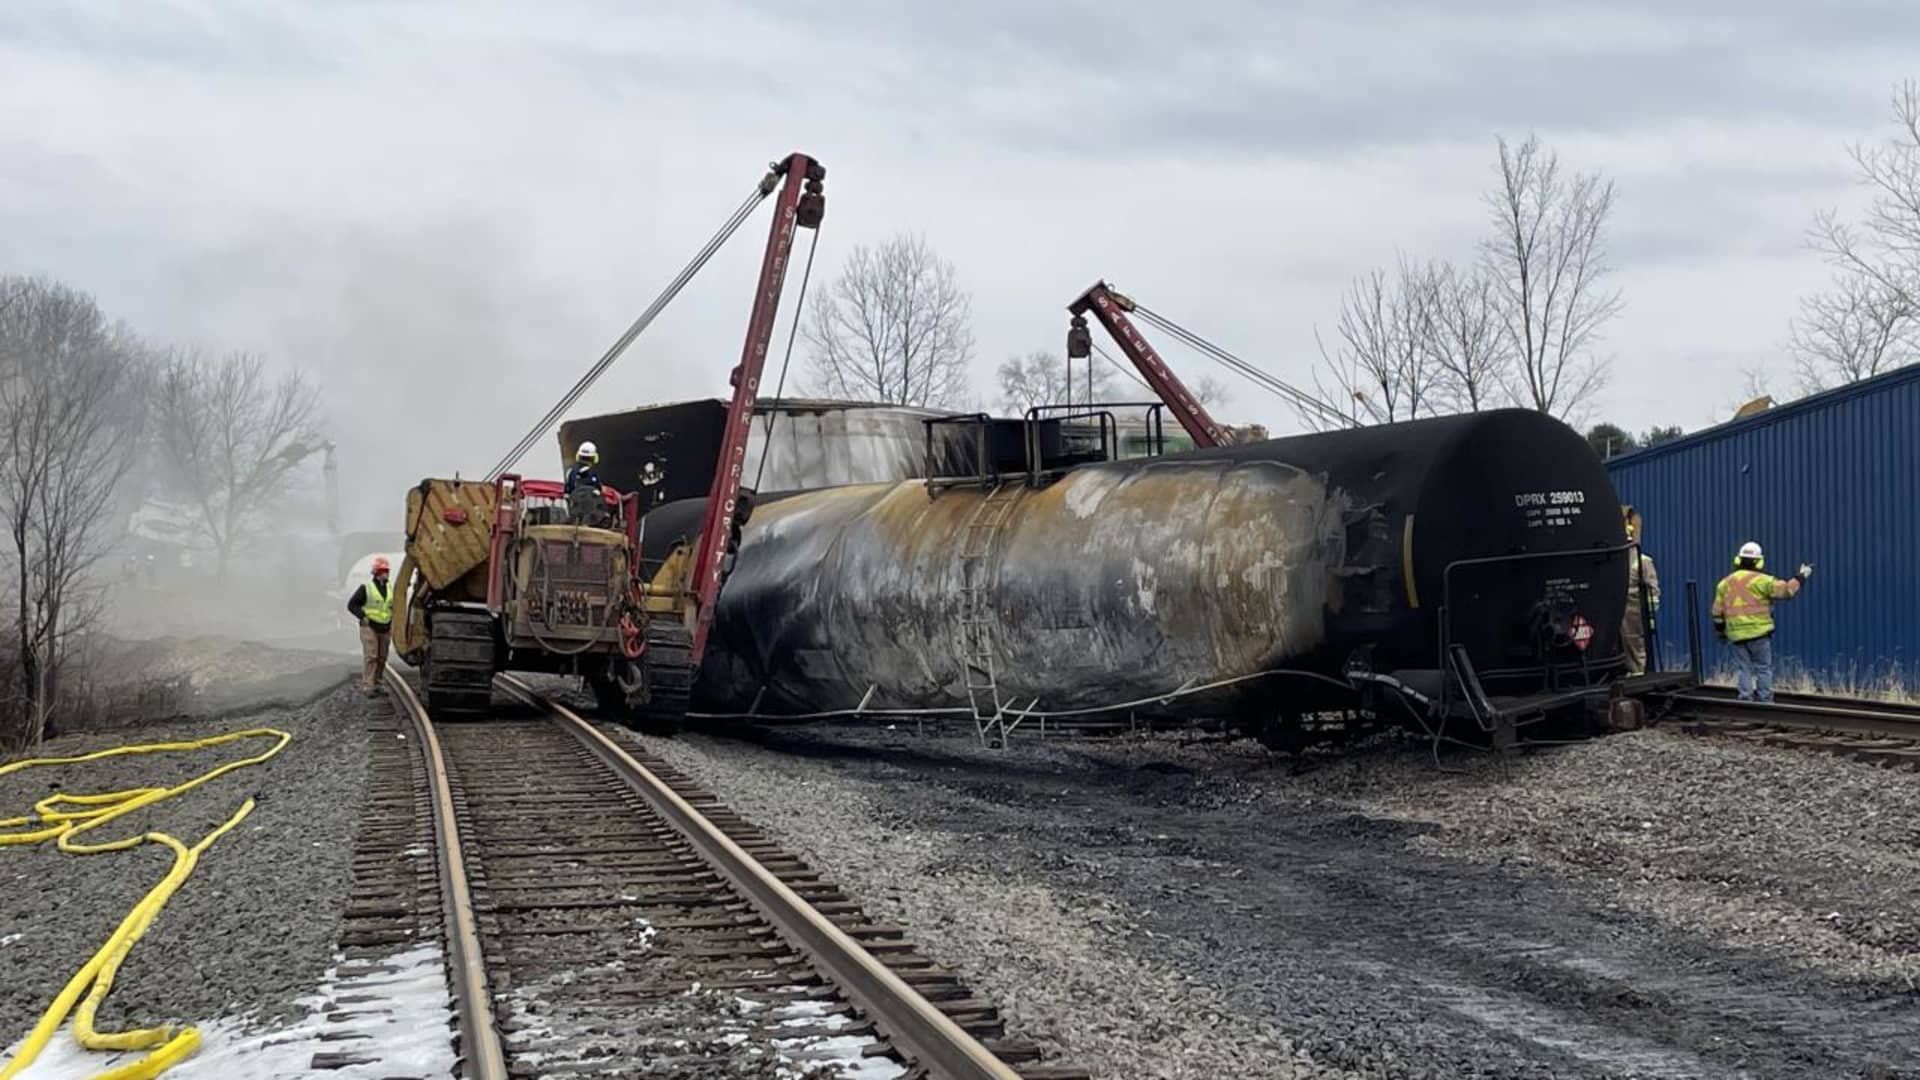 Norfolk Southern agrees to $310 million settlement over derailment